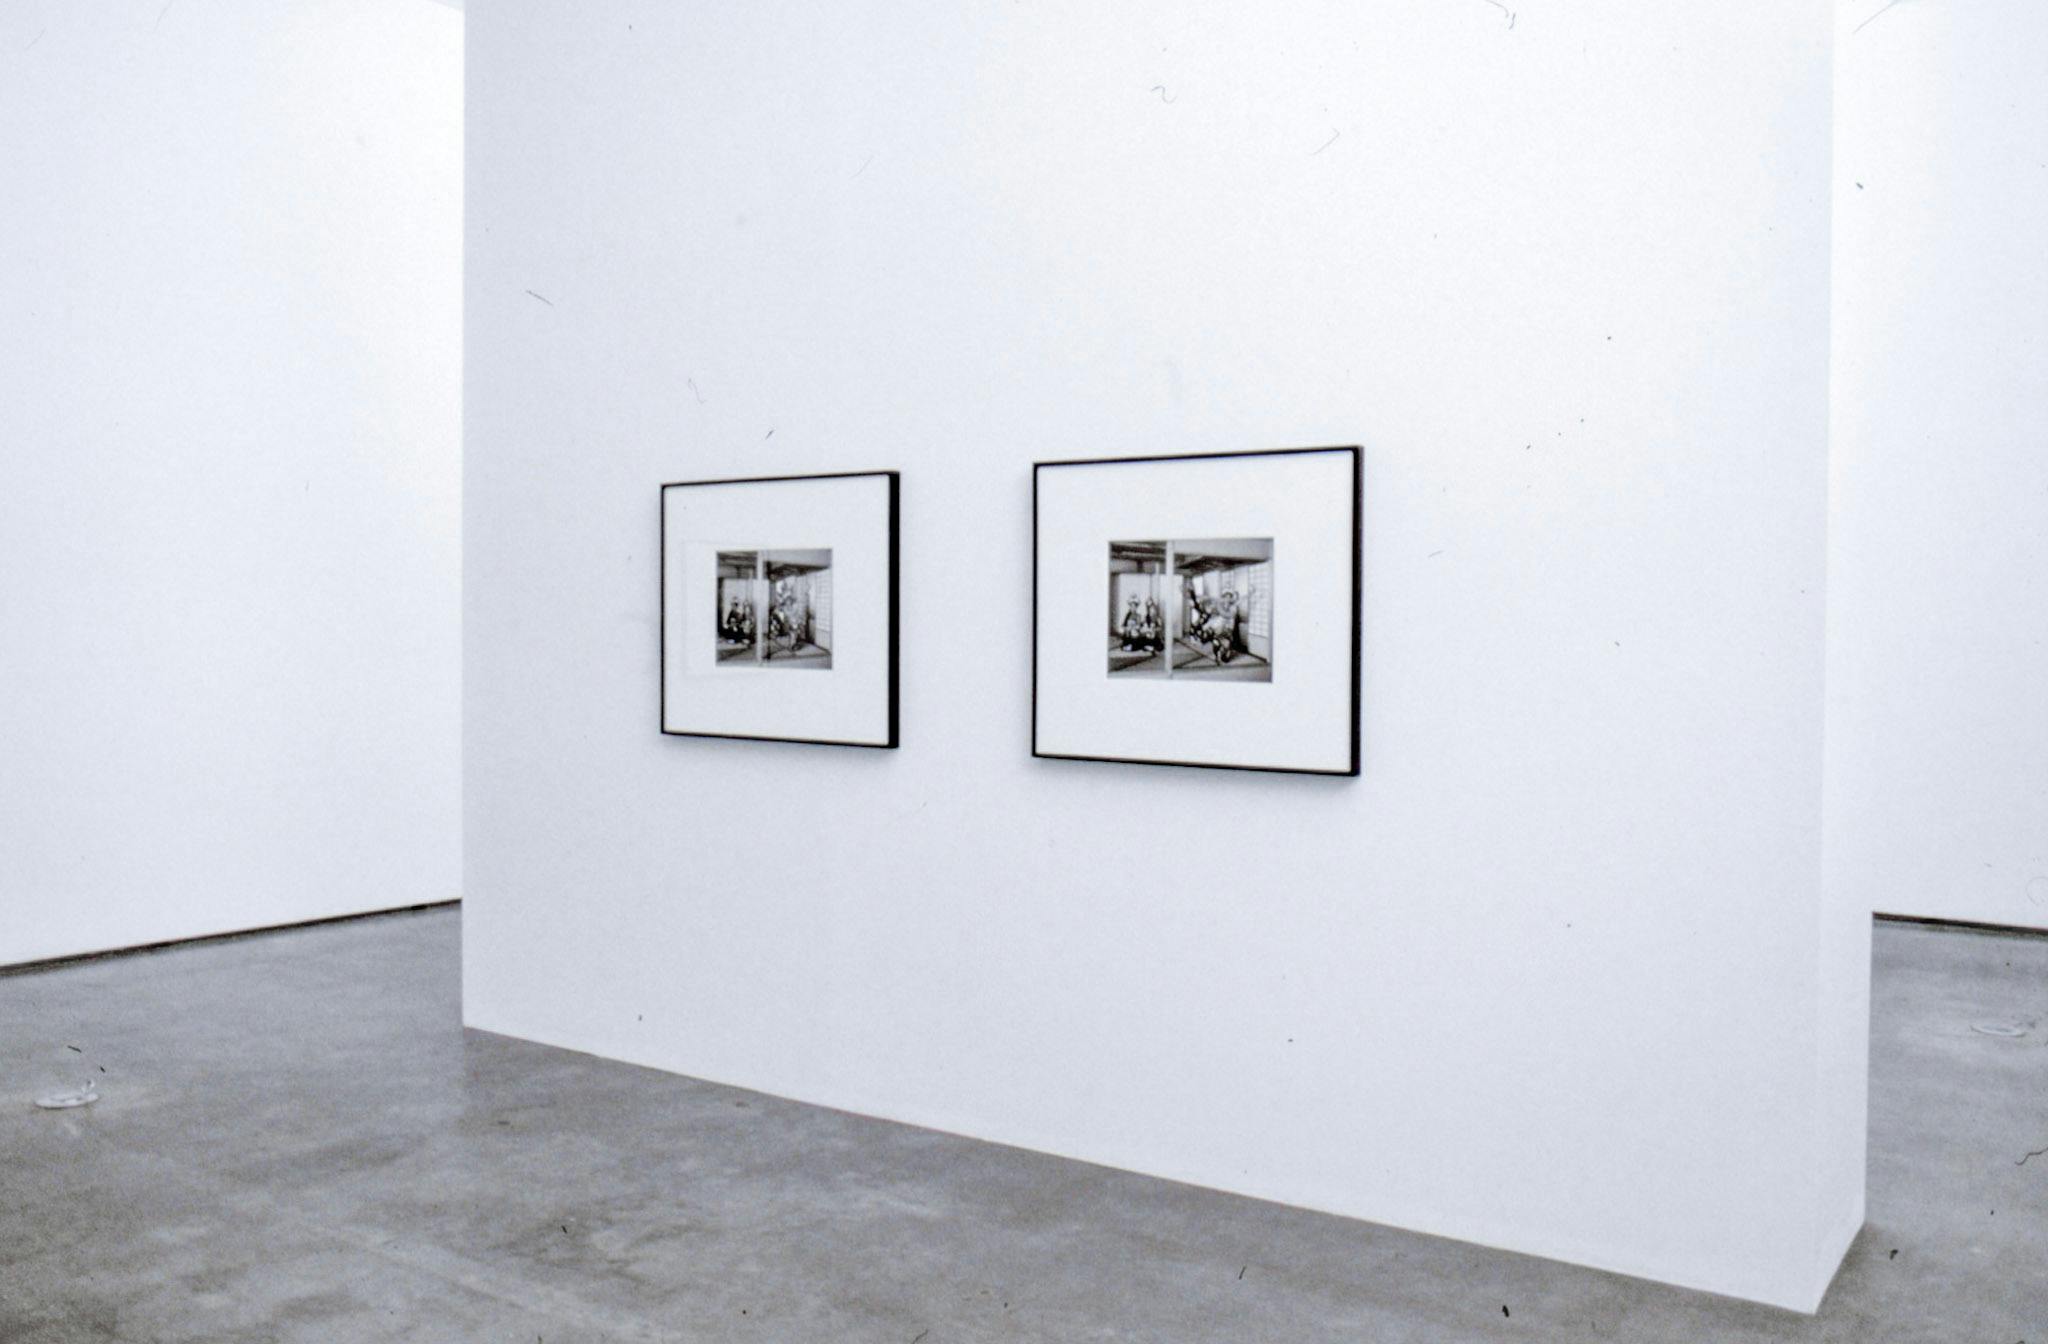 An install image of two black and white photographs on a gallery wall. Both photographs show a similar image of three people in a Japanese-style room, in which floors are covered with tatami mats.